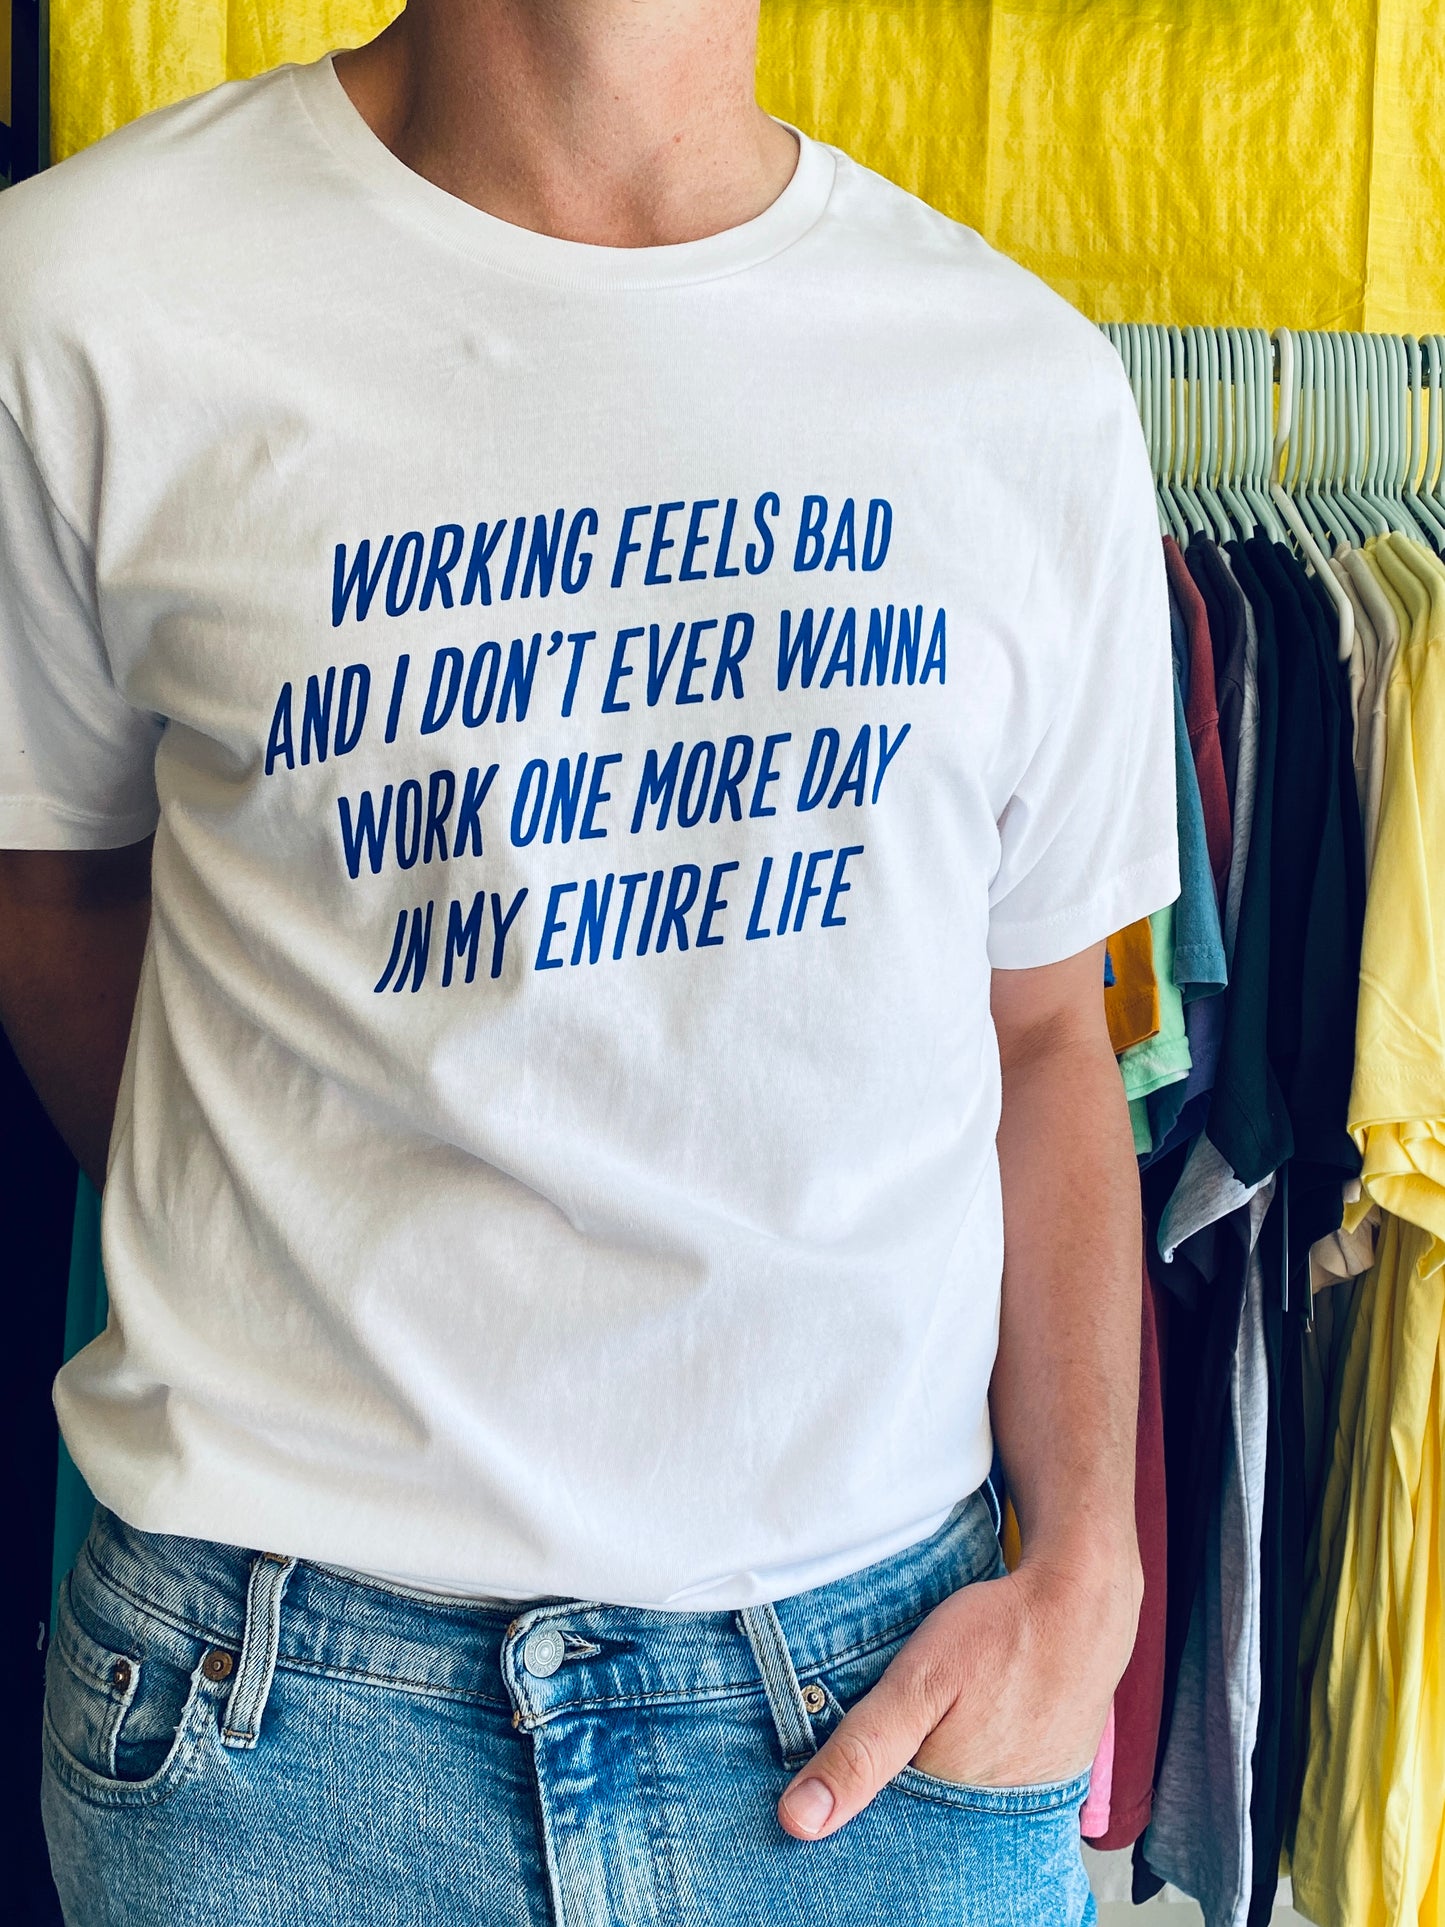 Search Party Working Feels Bad And I Don't Ever Wanna Work On More Day In My Entire Life Tee